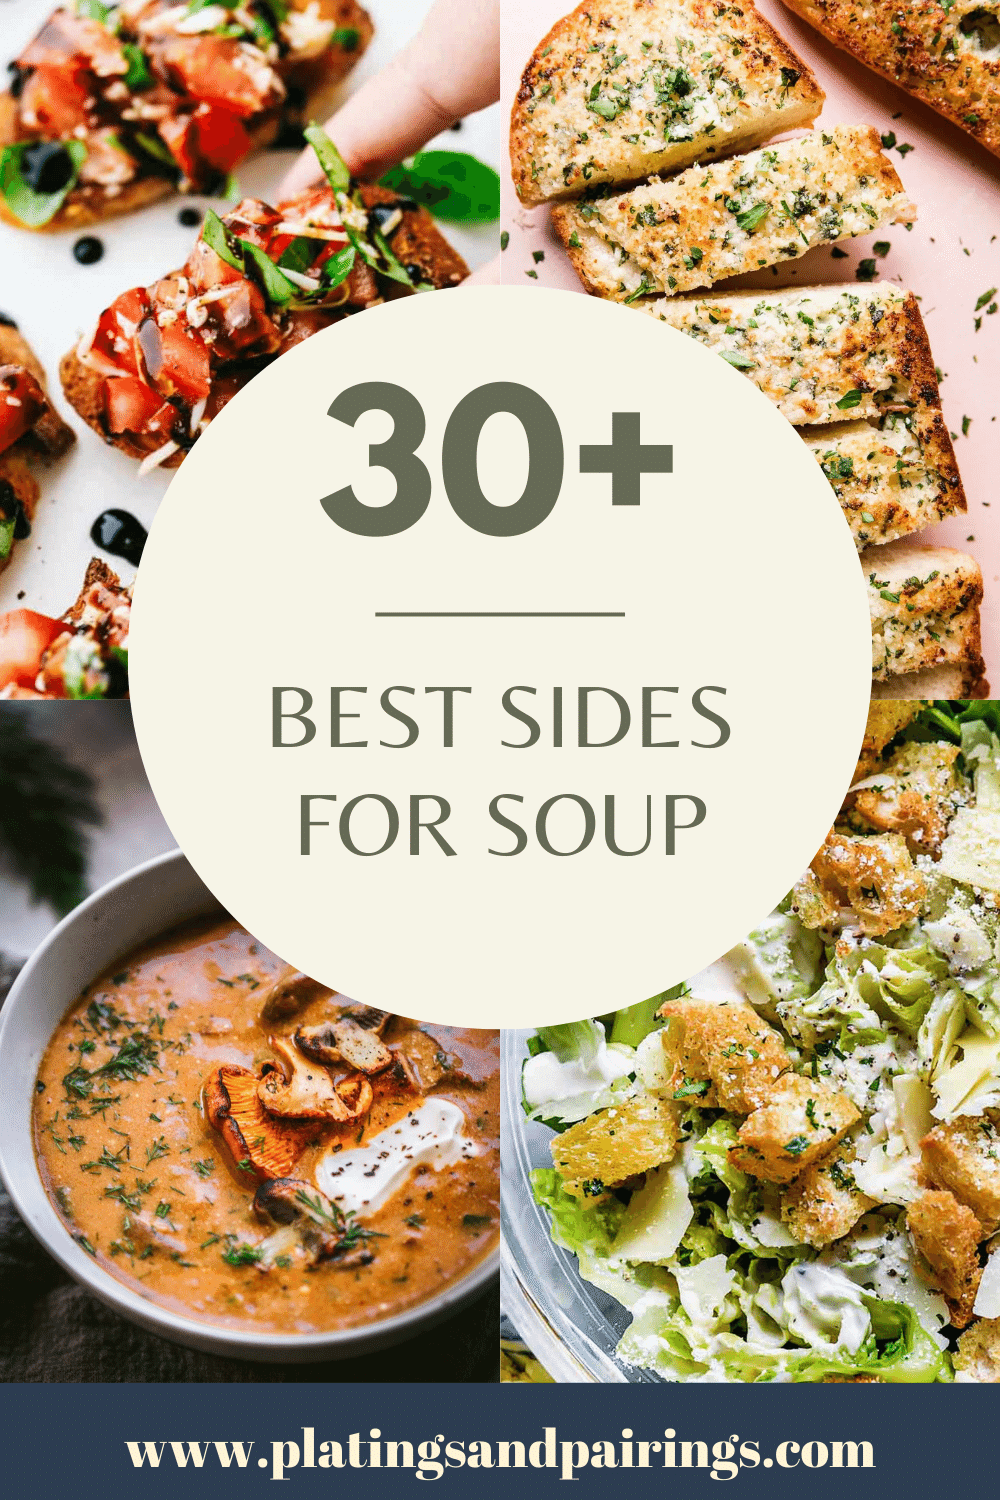 Collage of the best sides for soup with text overlay.